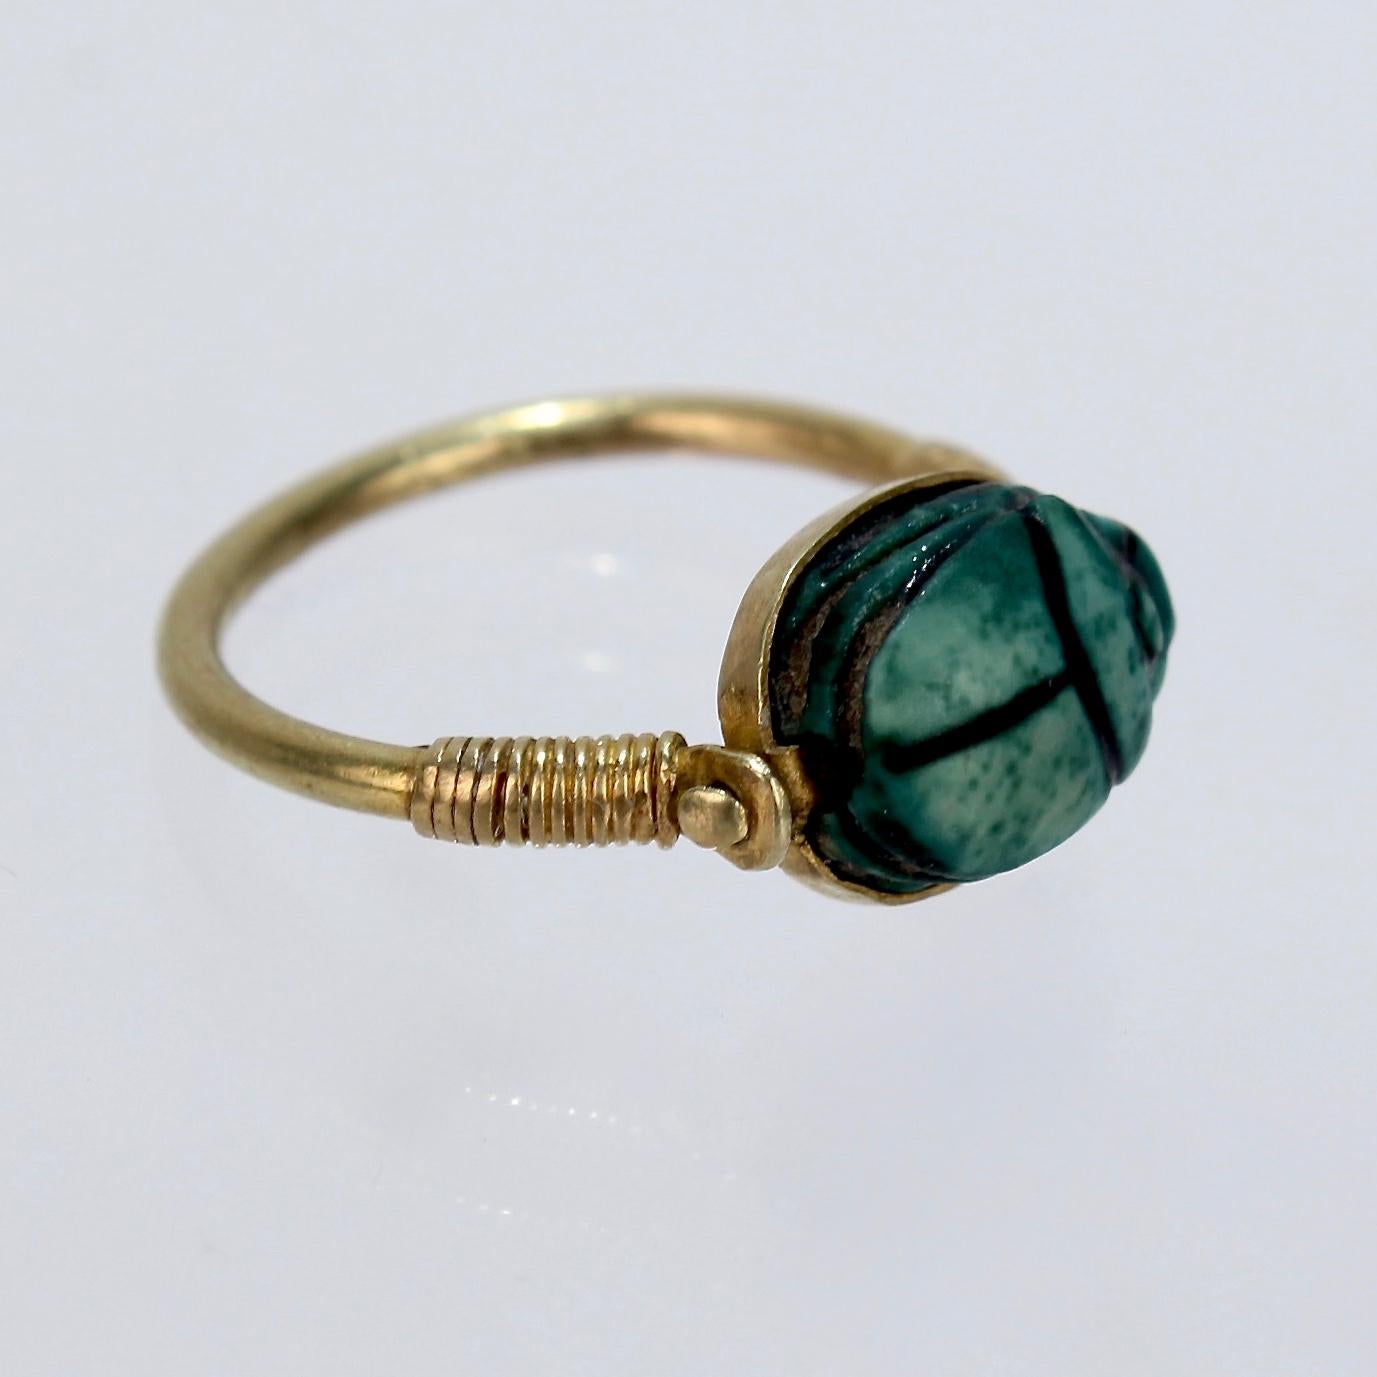 A rare antique Egyptian steatite scarab and gold finger ring.

It is accompanyied by a note from the shop of Mohammed Mohasseb & Son from Luxor, Egypt. 

The note identifies the ring as 18th Dynasty (about 1500 BCE), bearing the name of Amen-Ra -